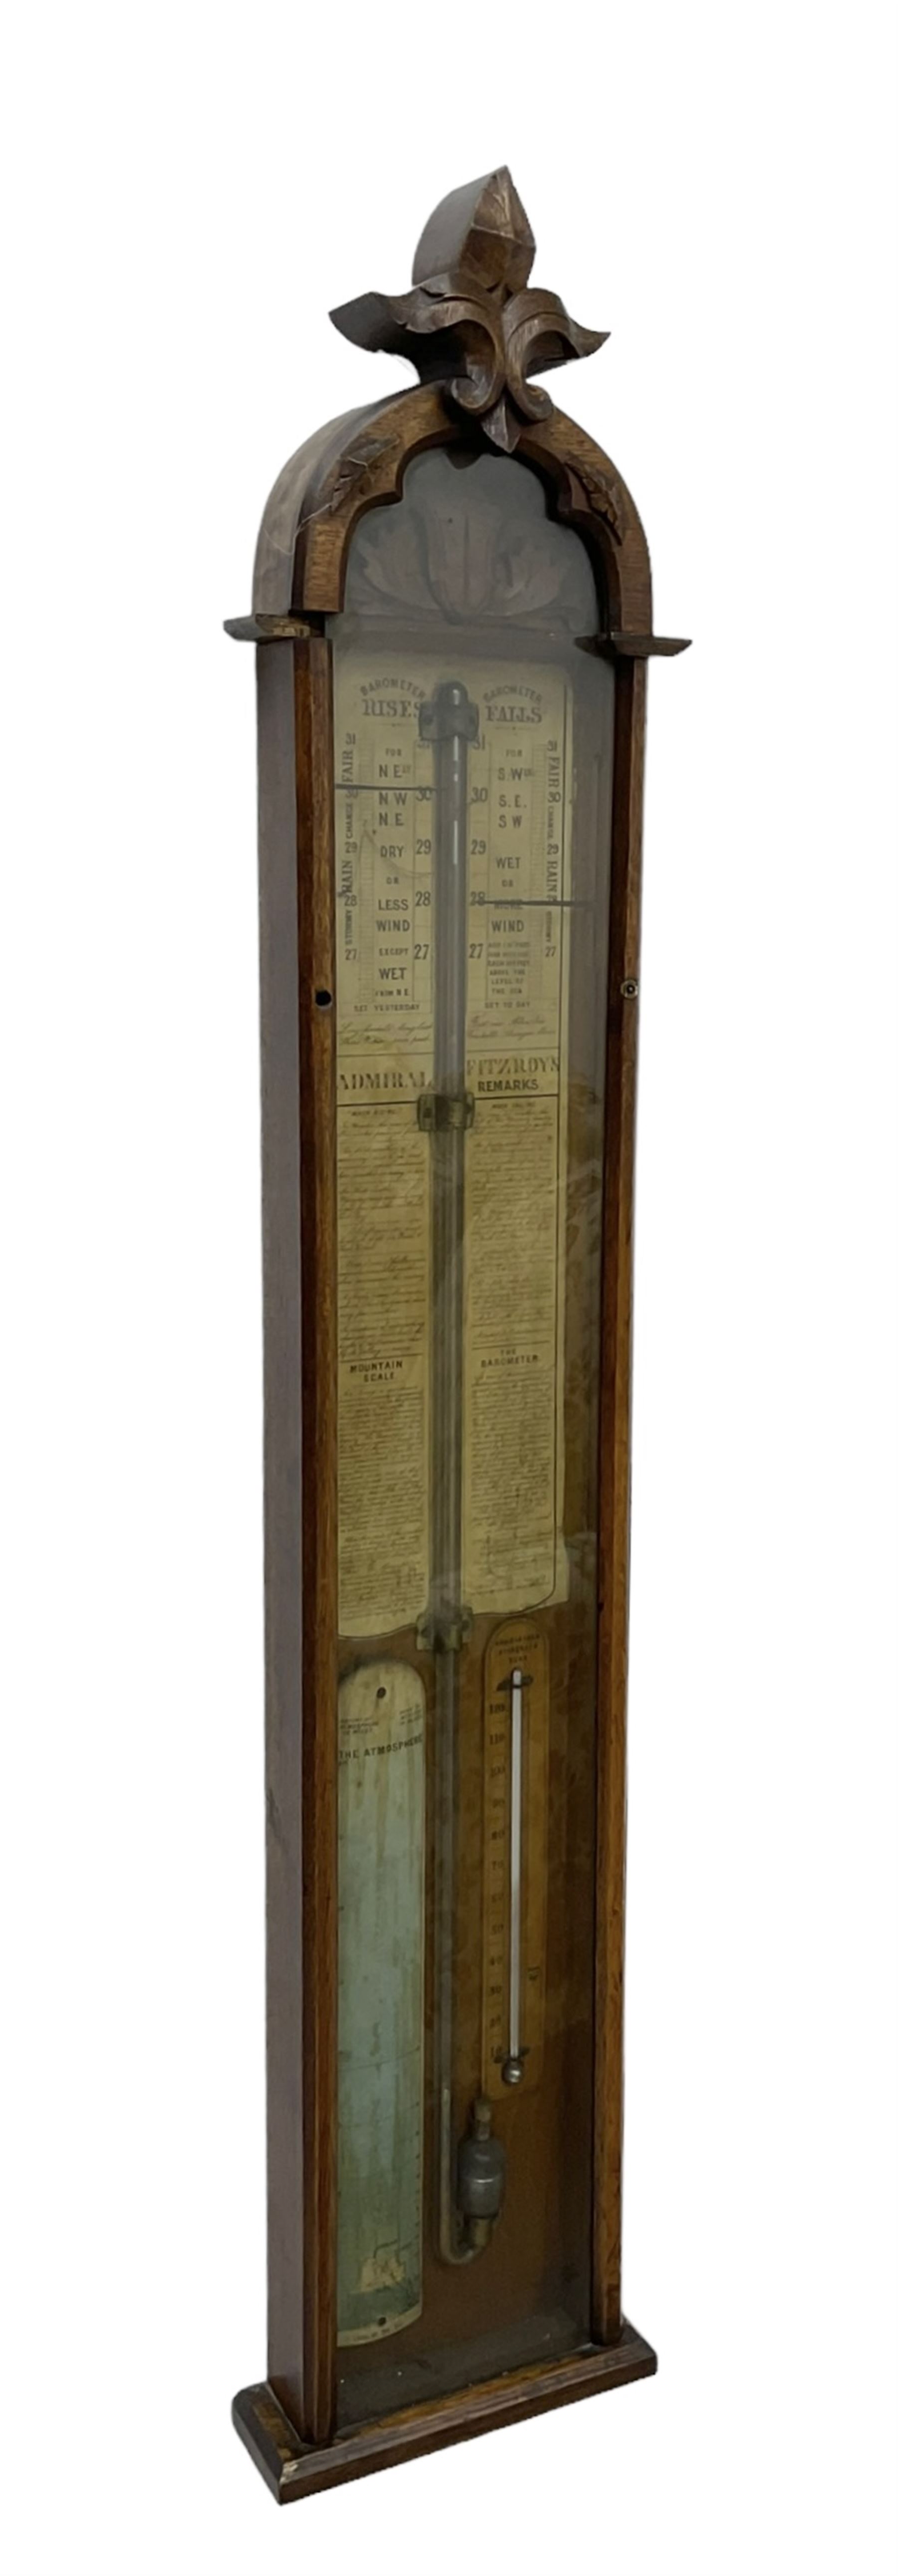 Admiral Fitzroy mercury barometer - in a late 19th century fully glazed oak case c1870 - Image 2 of 5